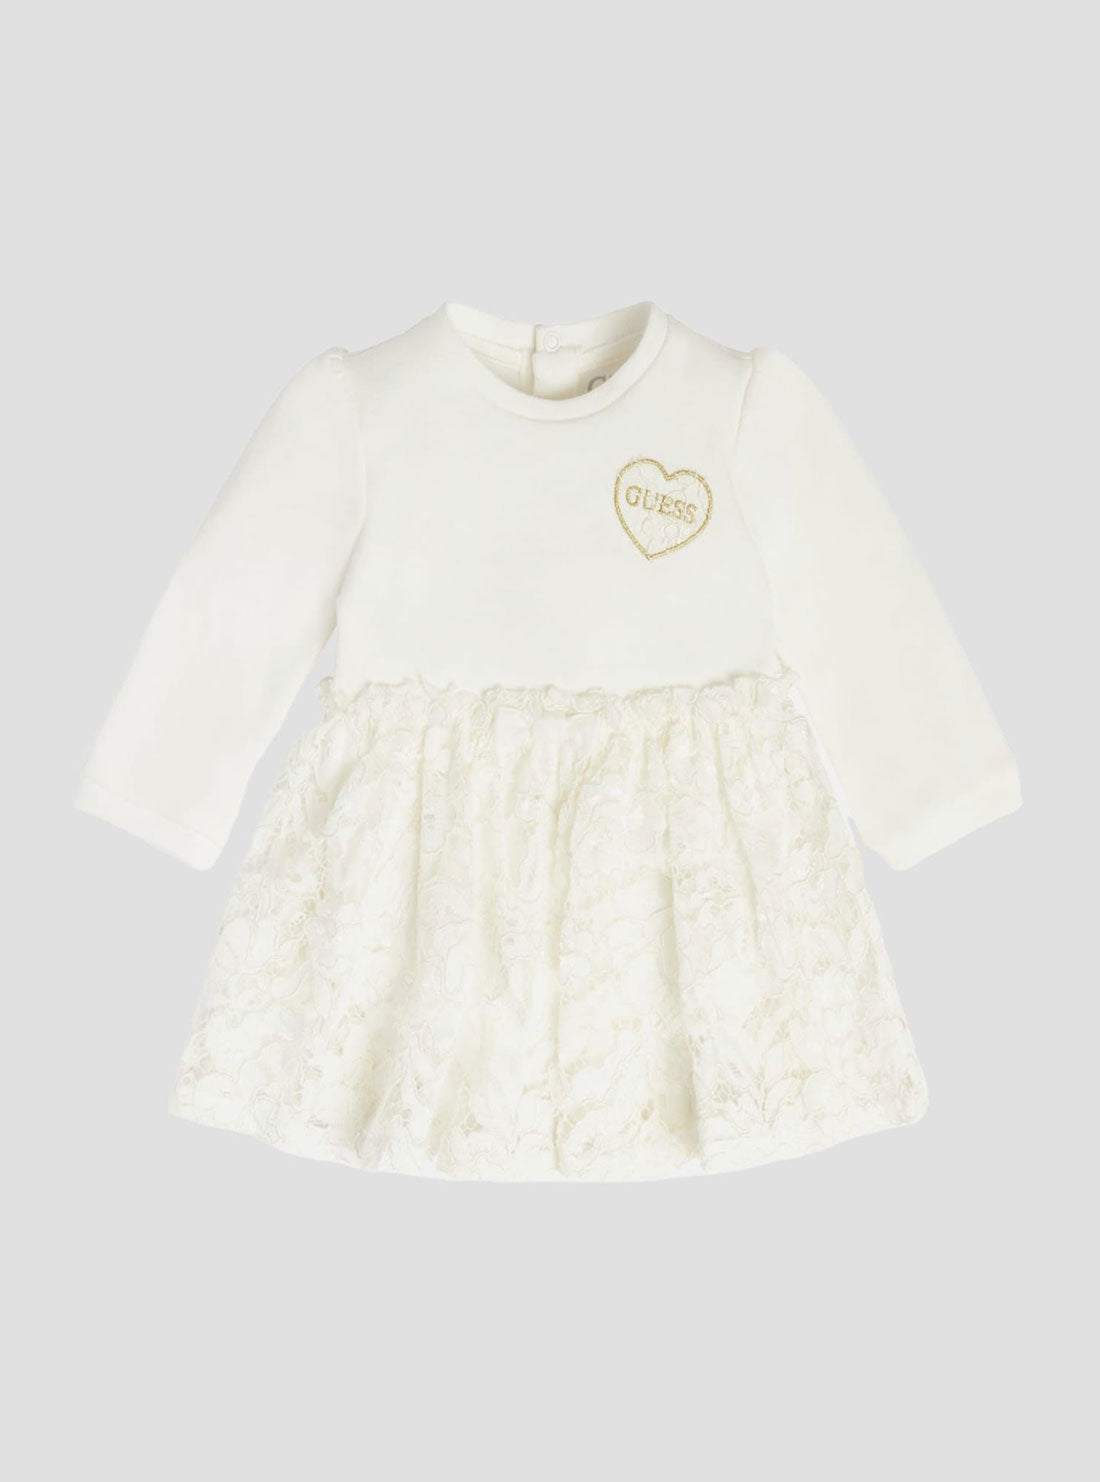 GUESS White Long Sleeve Dress (3-12M) front view